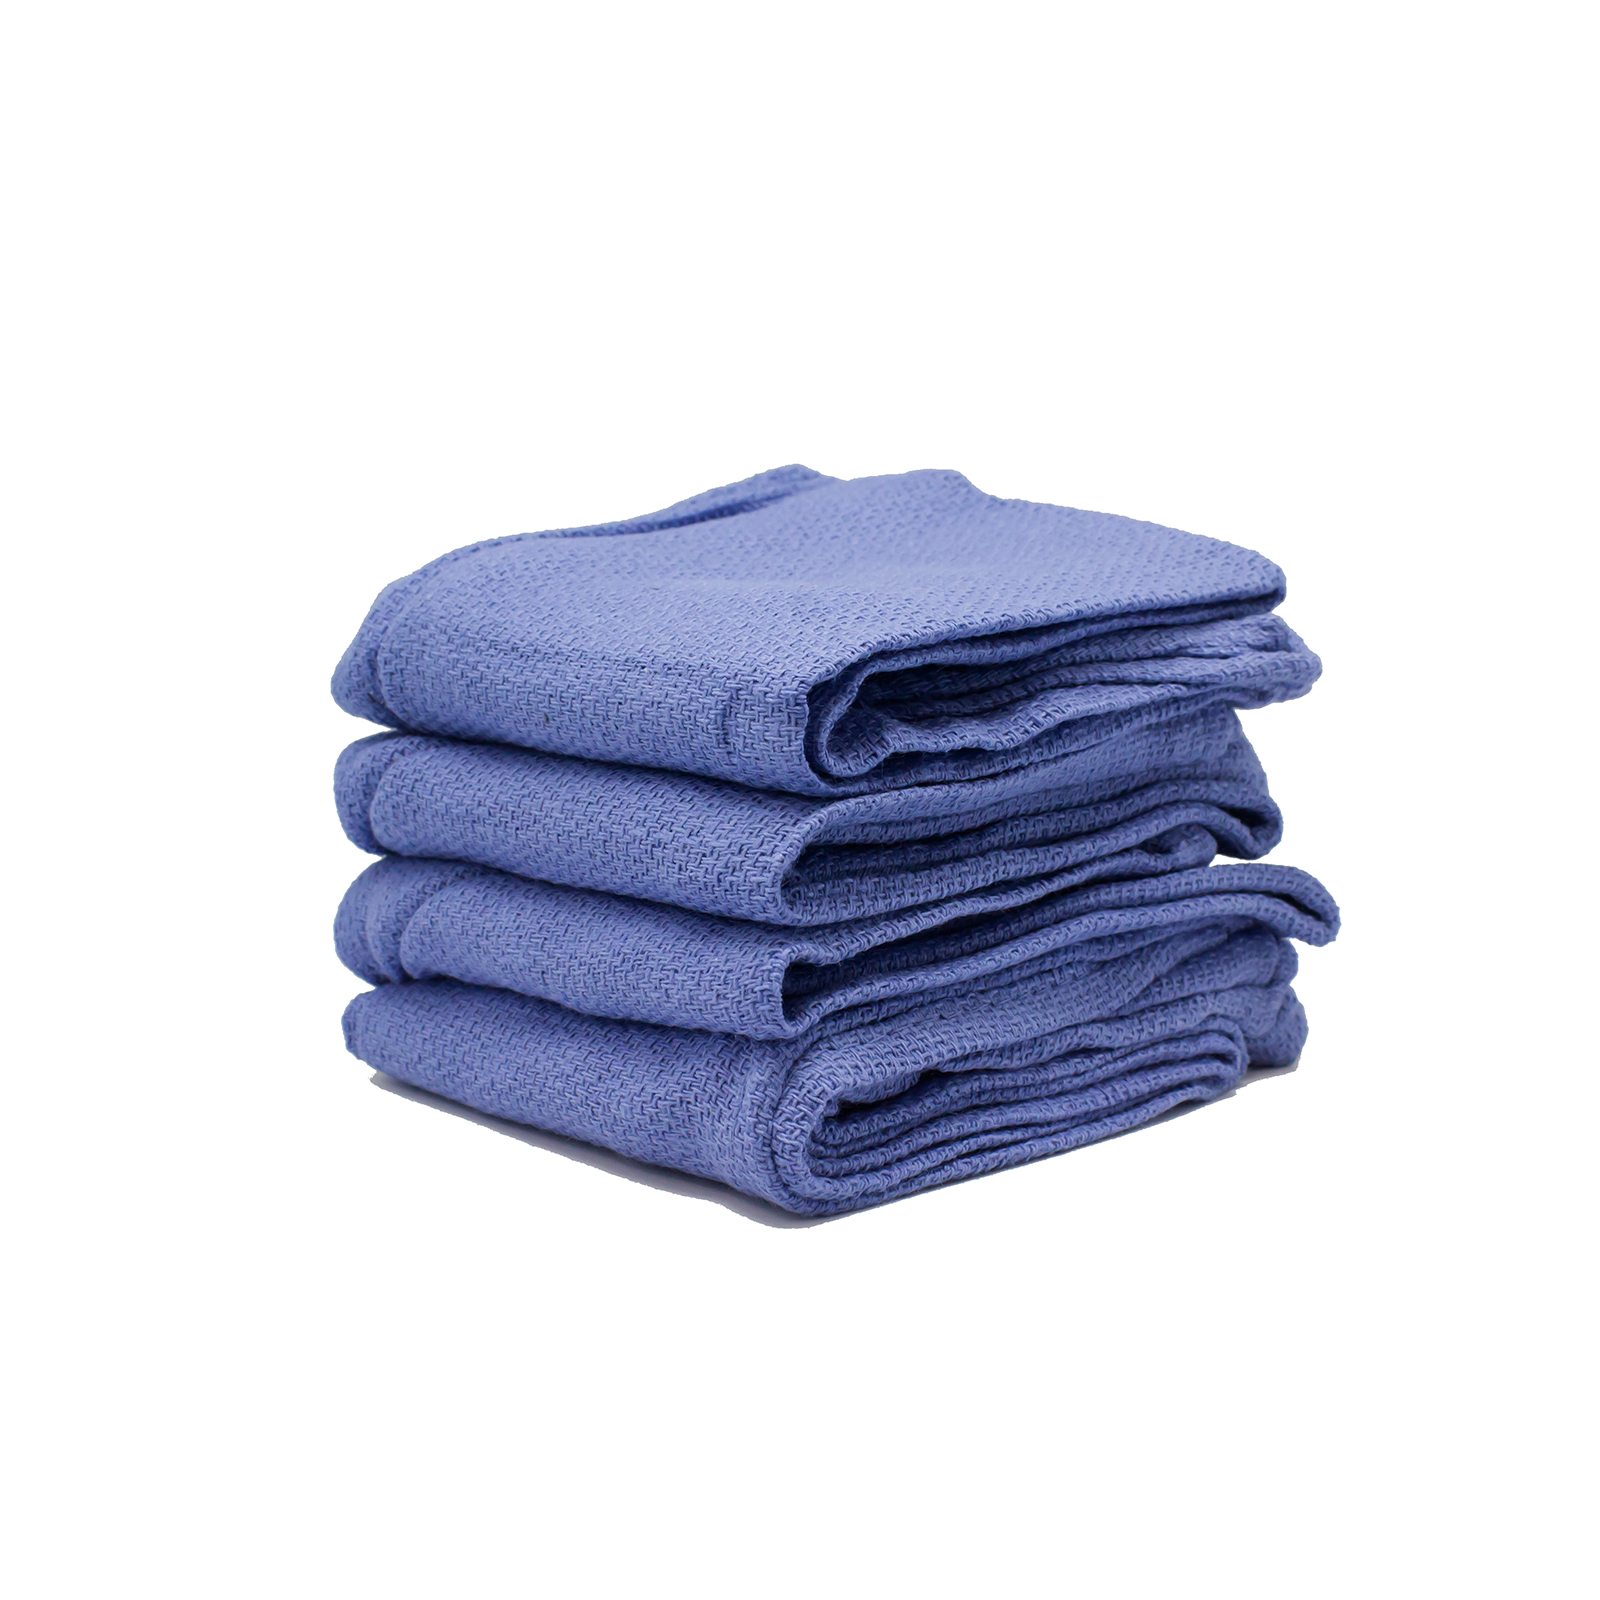 Towels & Wraps Products, Supplies and Equipment